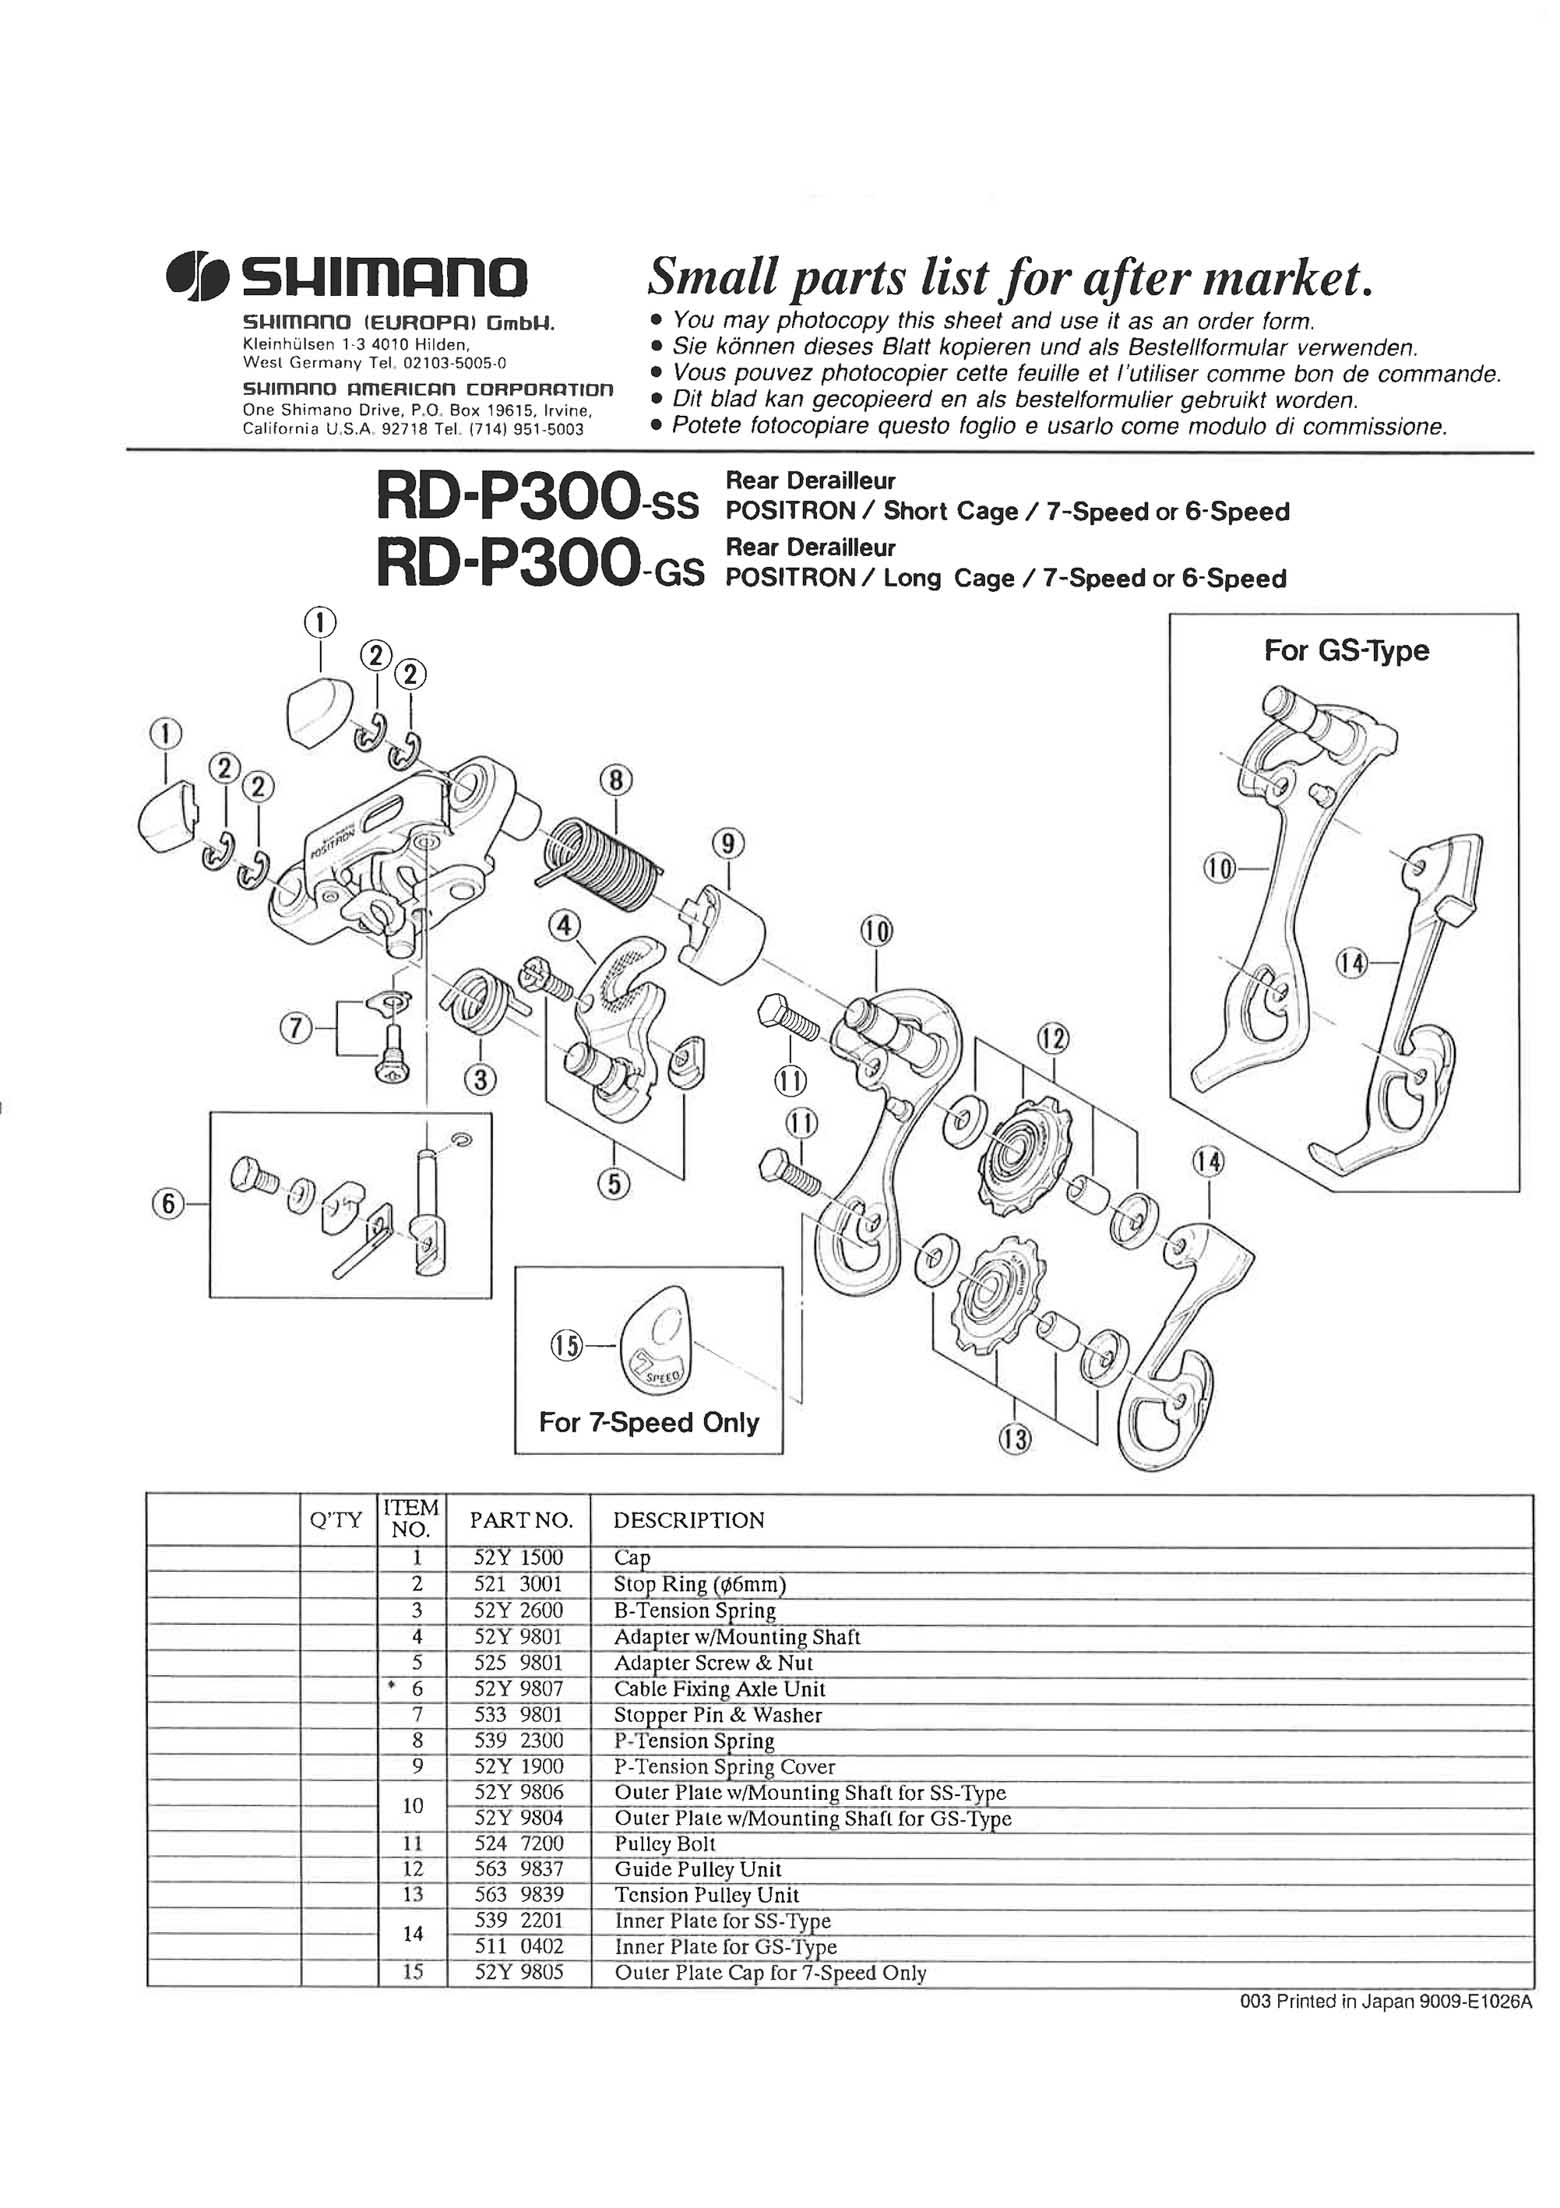 Shimano web site 2020 - exploded views from 1990 Positron (P300 series) main image